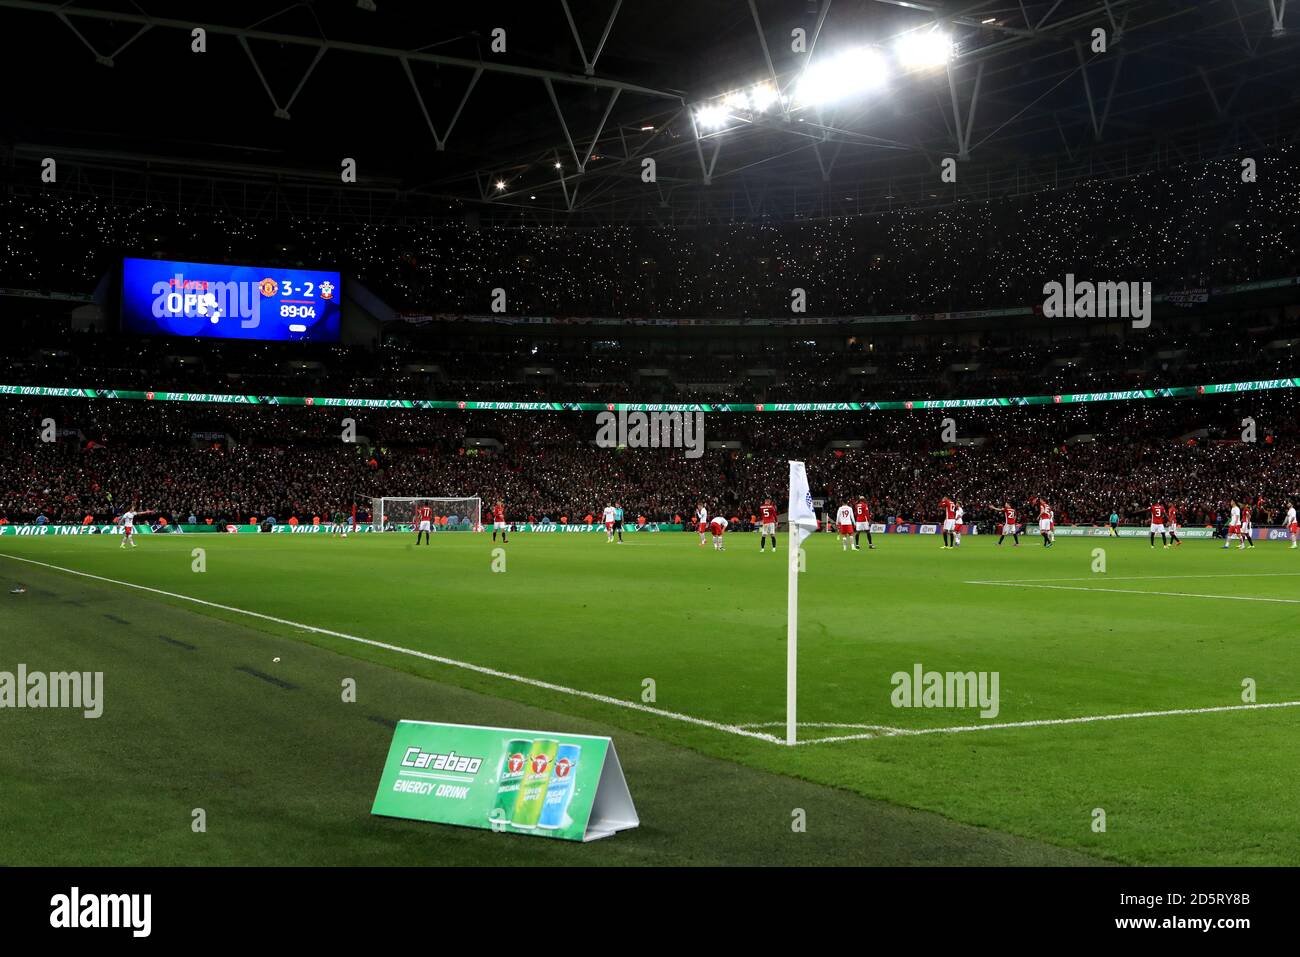 A general view of a Carabao toblerone advertising board by the corner of the pitch during the game  Stock Photo